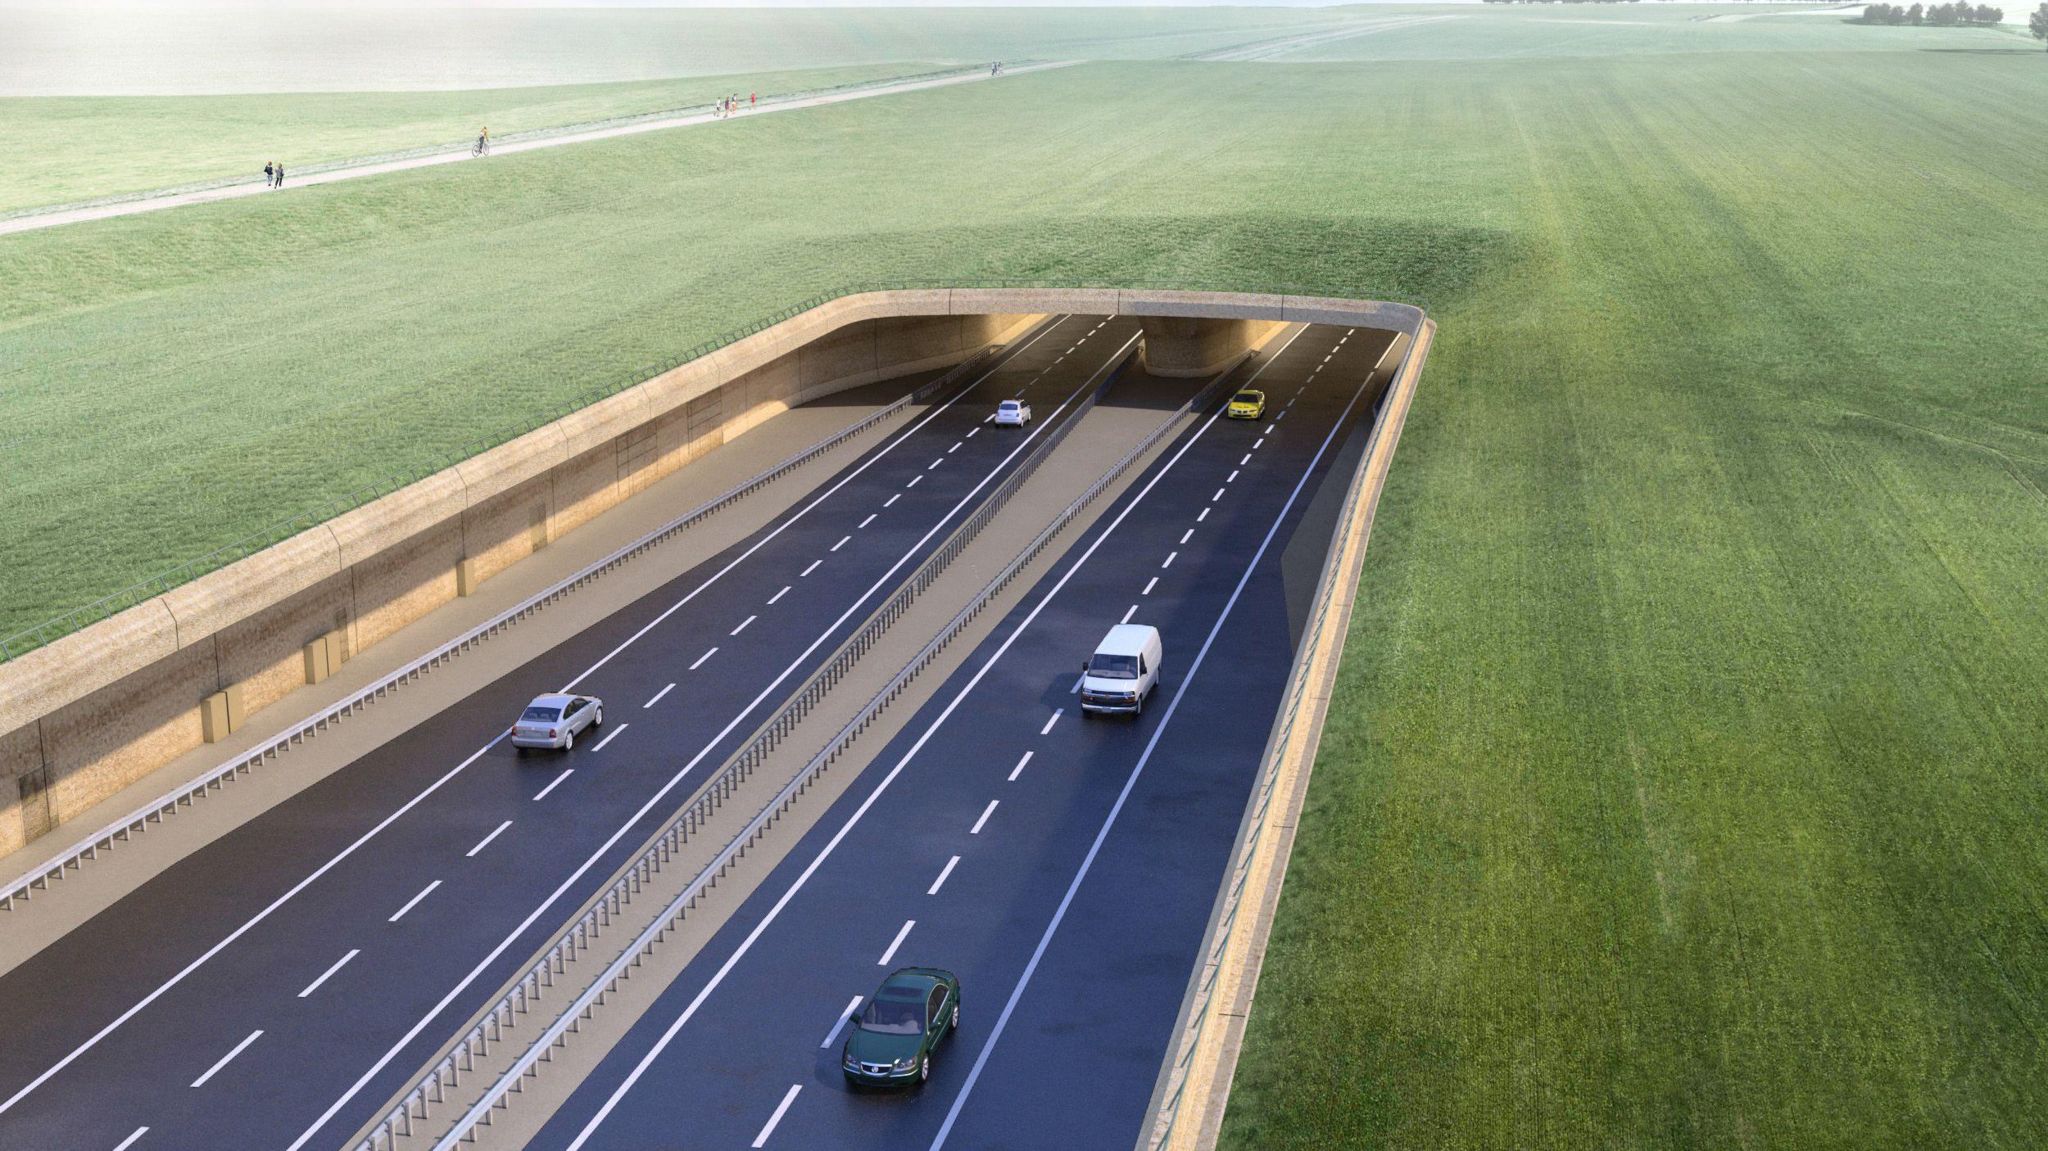 Visualisation of the proposed A303 Tunnel West portal approach, released as part of the A303 Stonehenge (Amesbury to Berwick Down) project.